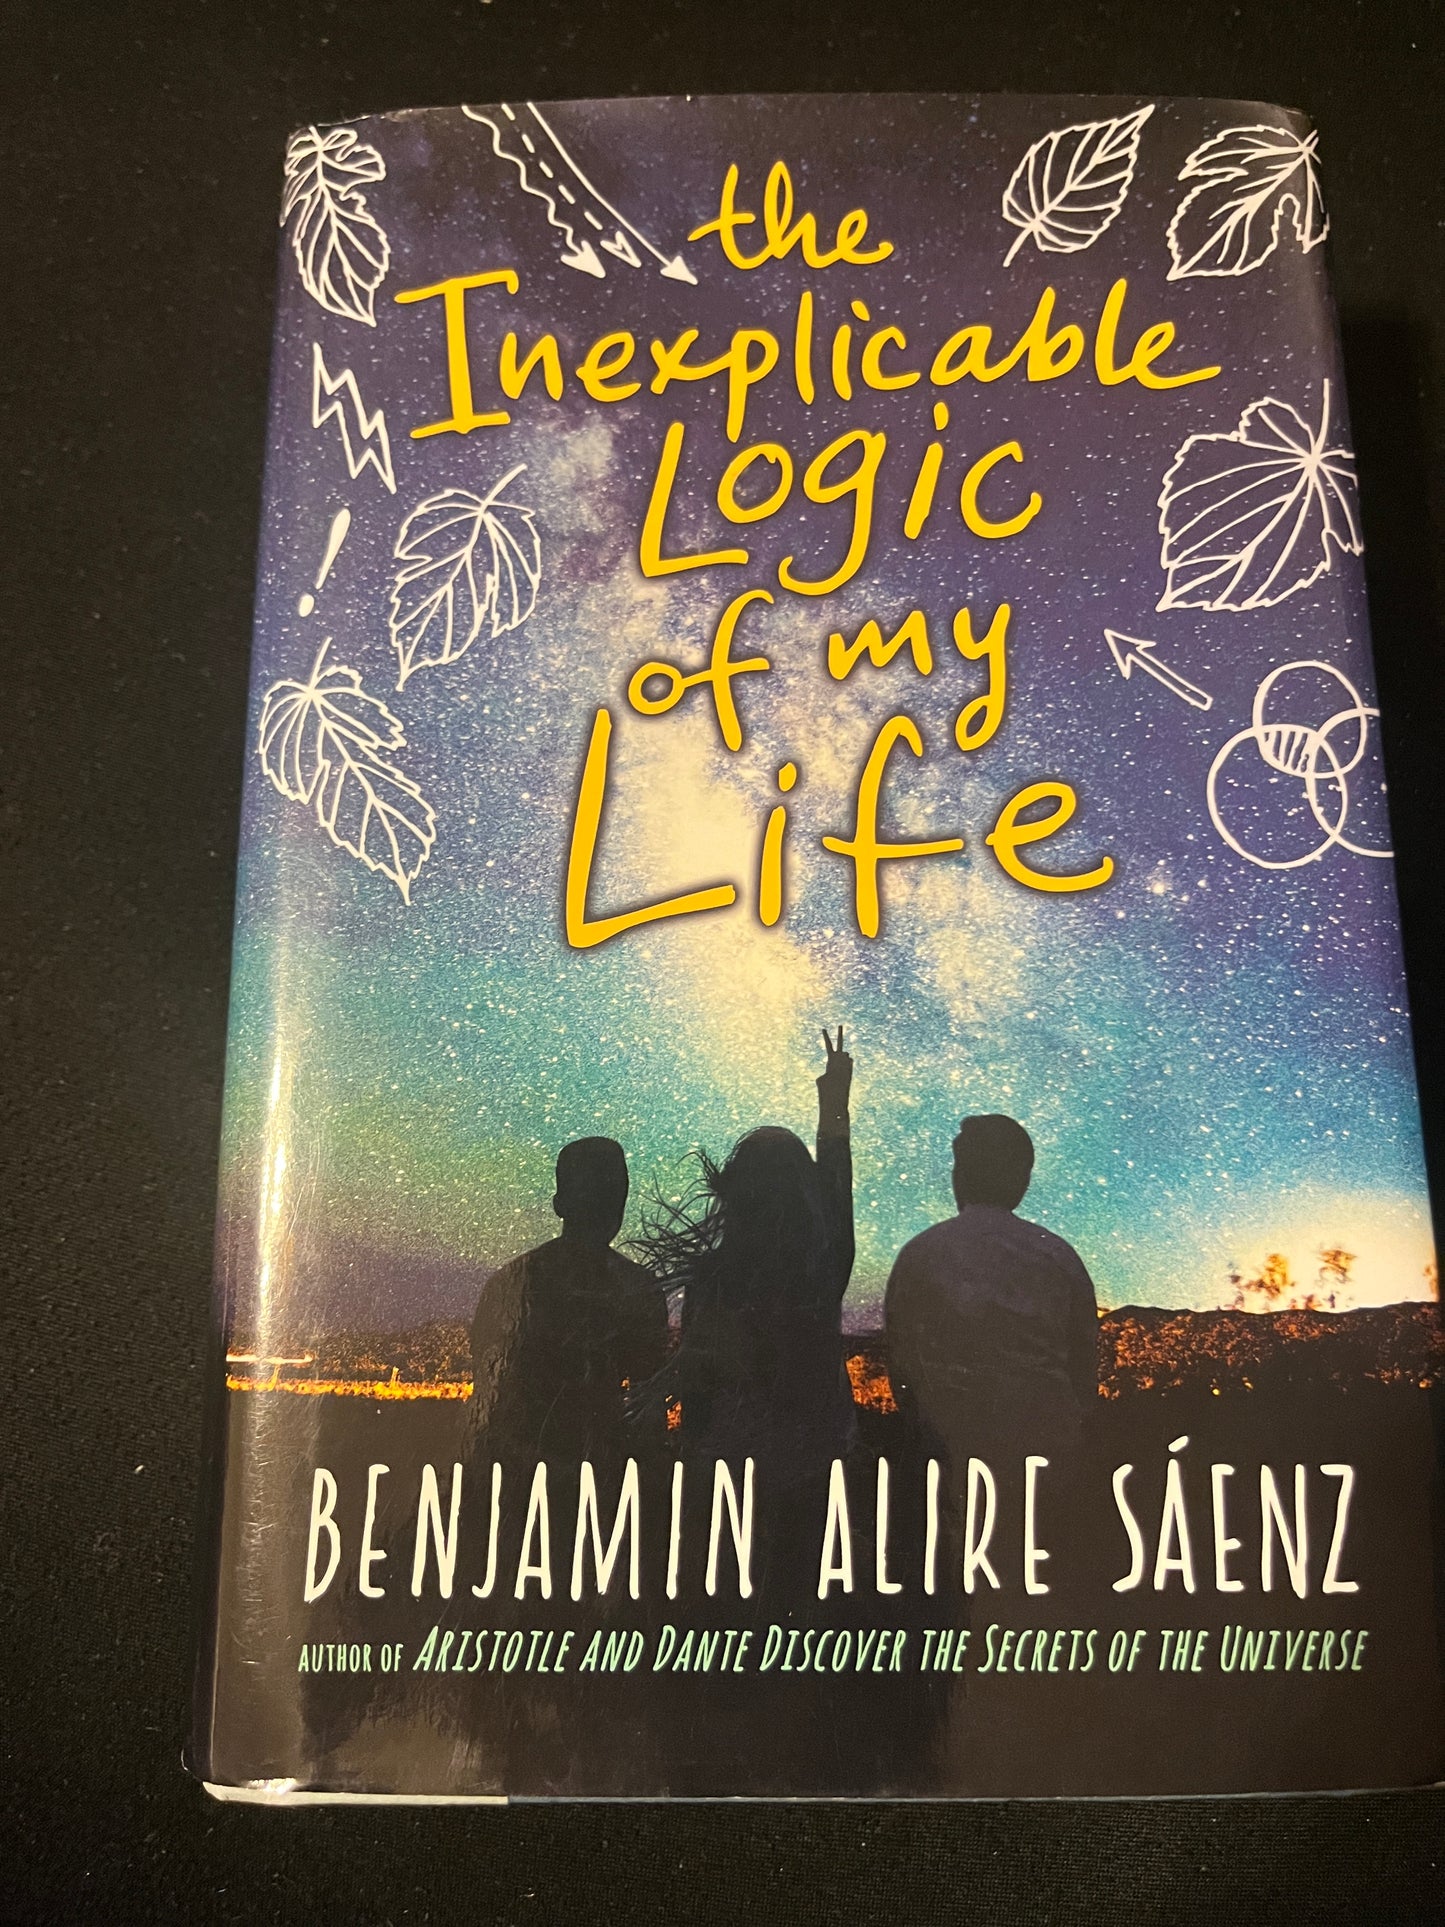 THE INEXPLICABLE LOGIC OF MY LIFE by Benjamin Alire Saenz